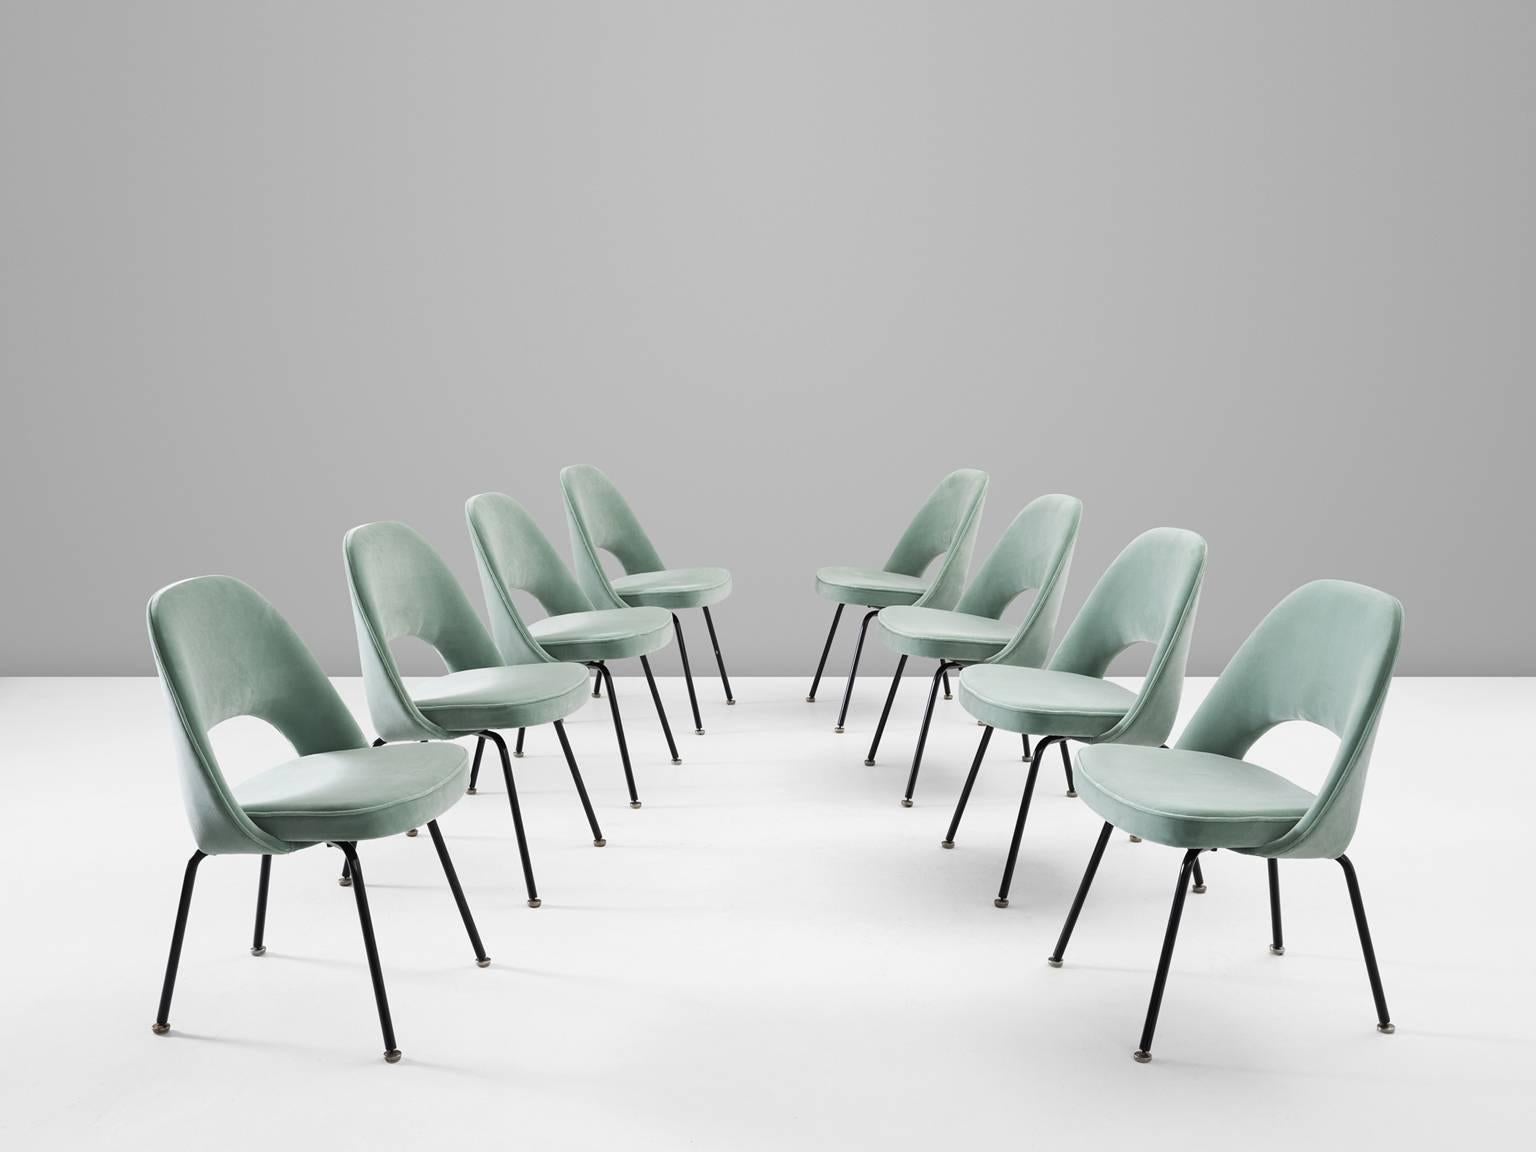 Set of eight chairs model 72, in metal and fabric, by Eero Saarinen for Knoll International, United States, 1948. 

Eight organic shaped chairs designed by Eero Saarinen. This iconic model is reupholstered in a soft sea-green velvet fabric. A